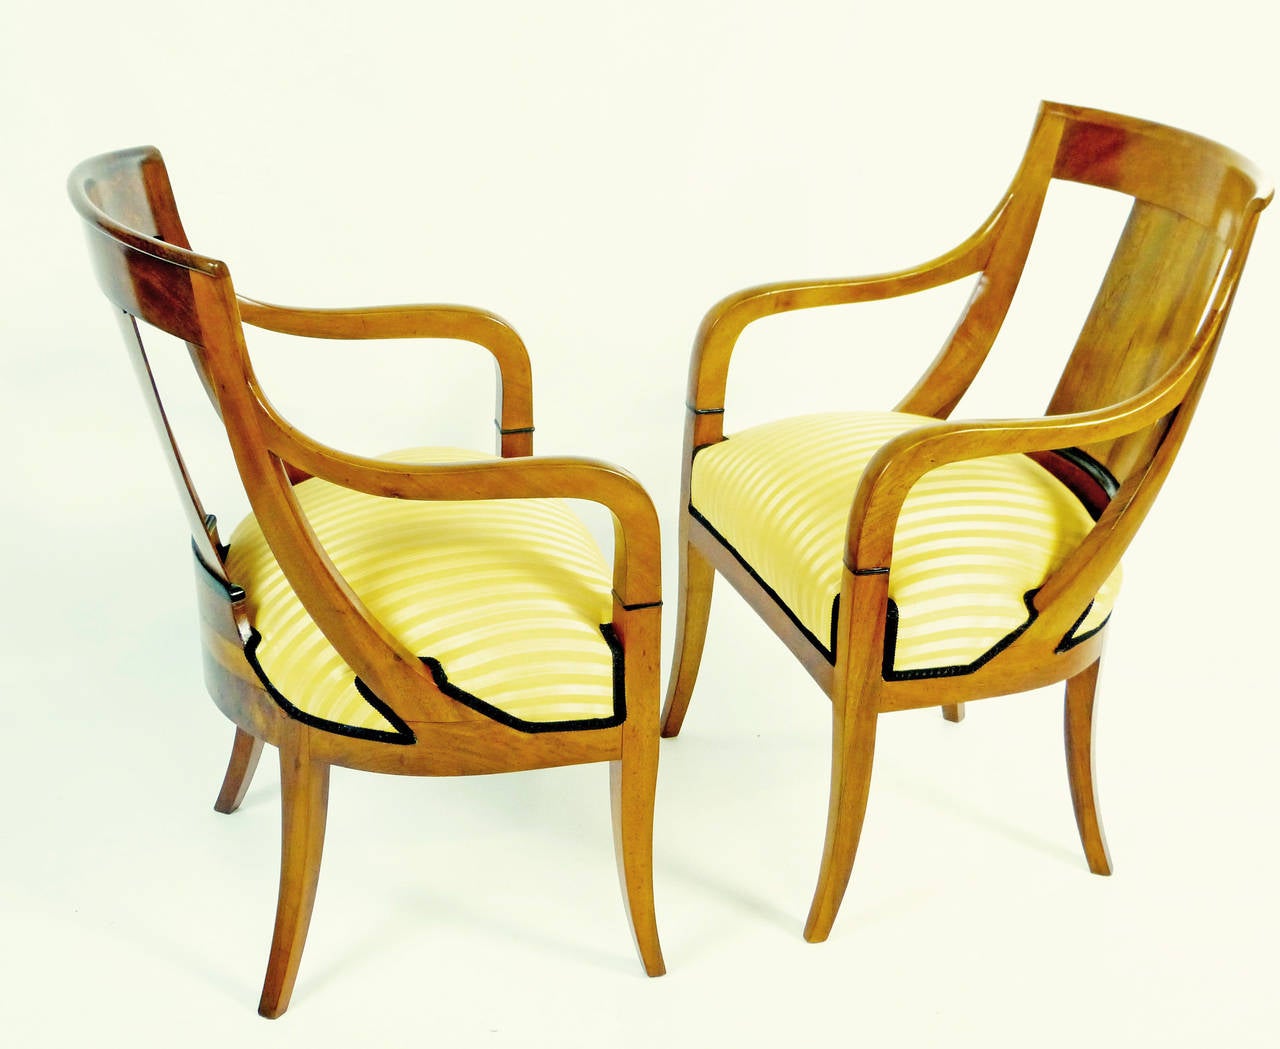 Elegant and unusual pair of period Biedermeier armchairs of north German origin of amber colored solid figured walnut. The supports on each side of the curved back splat unite with the arms and both unite around the top of the front legs to produce